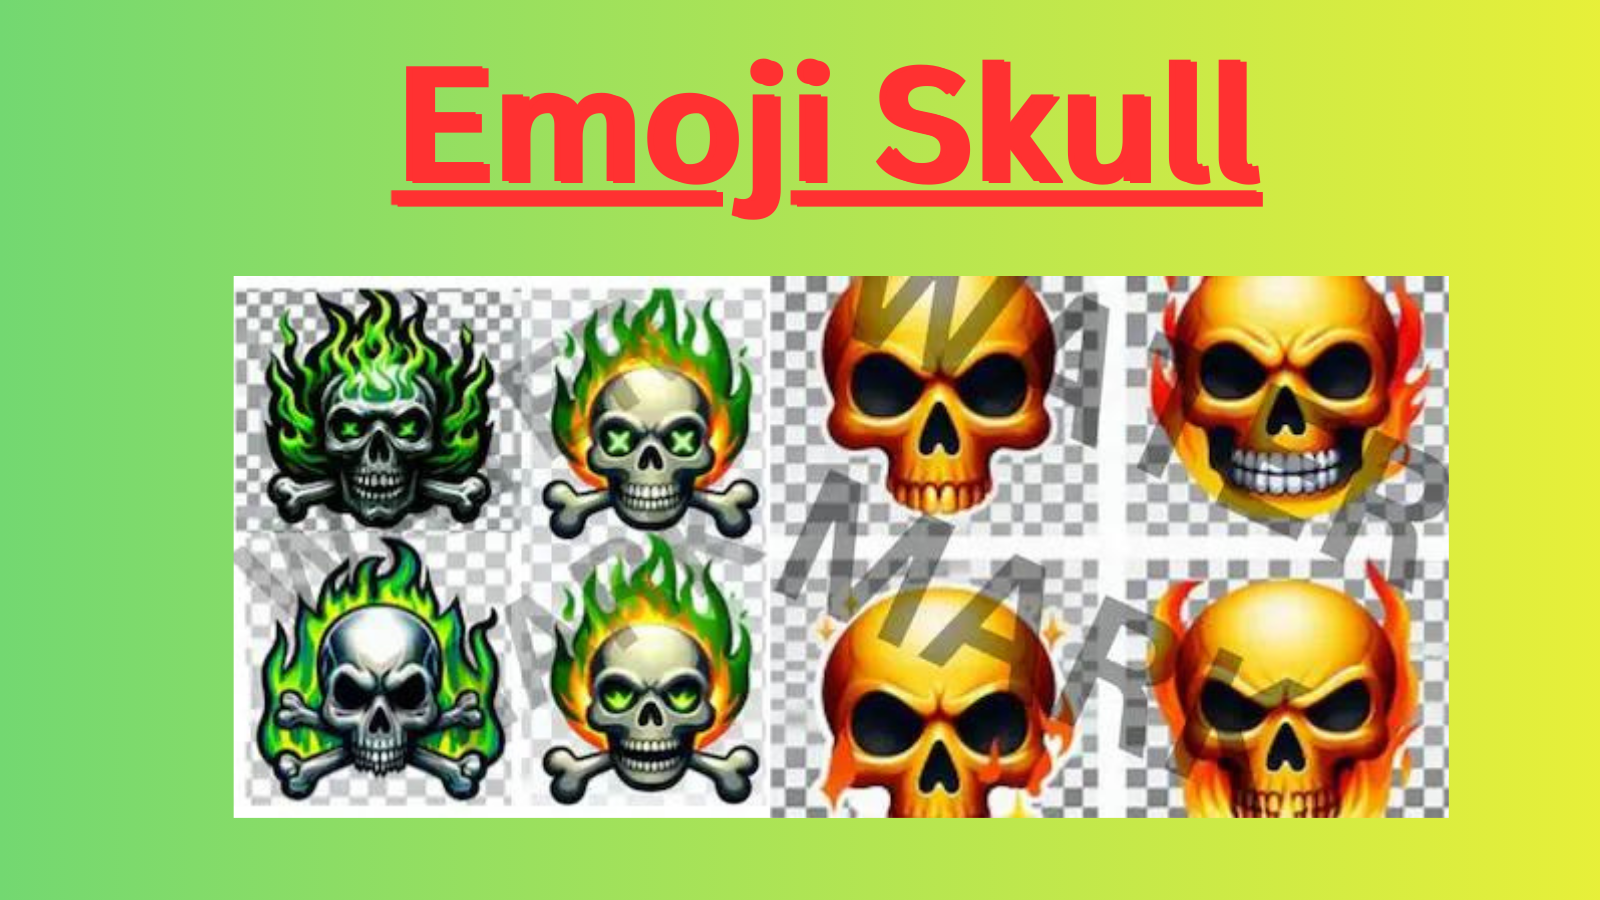 A collage of skull emojis showing a variety of expressions